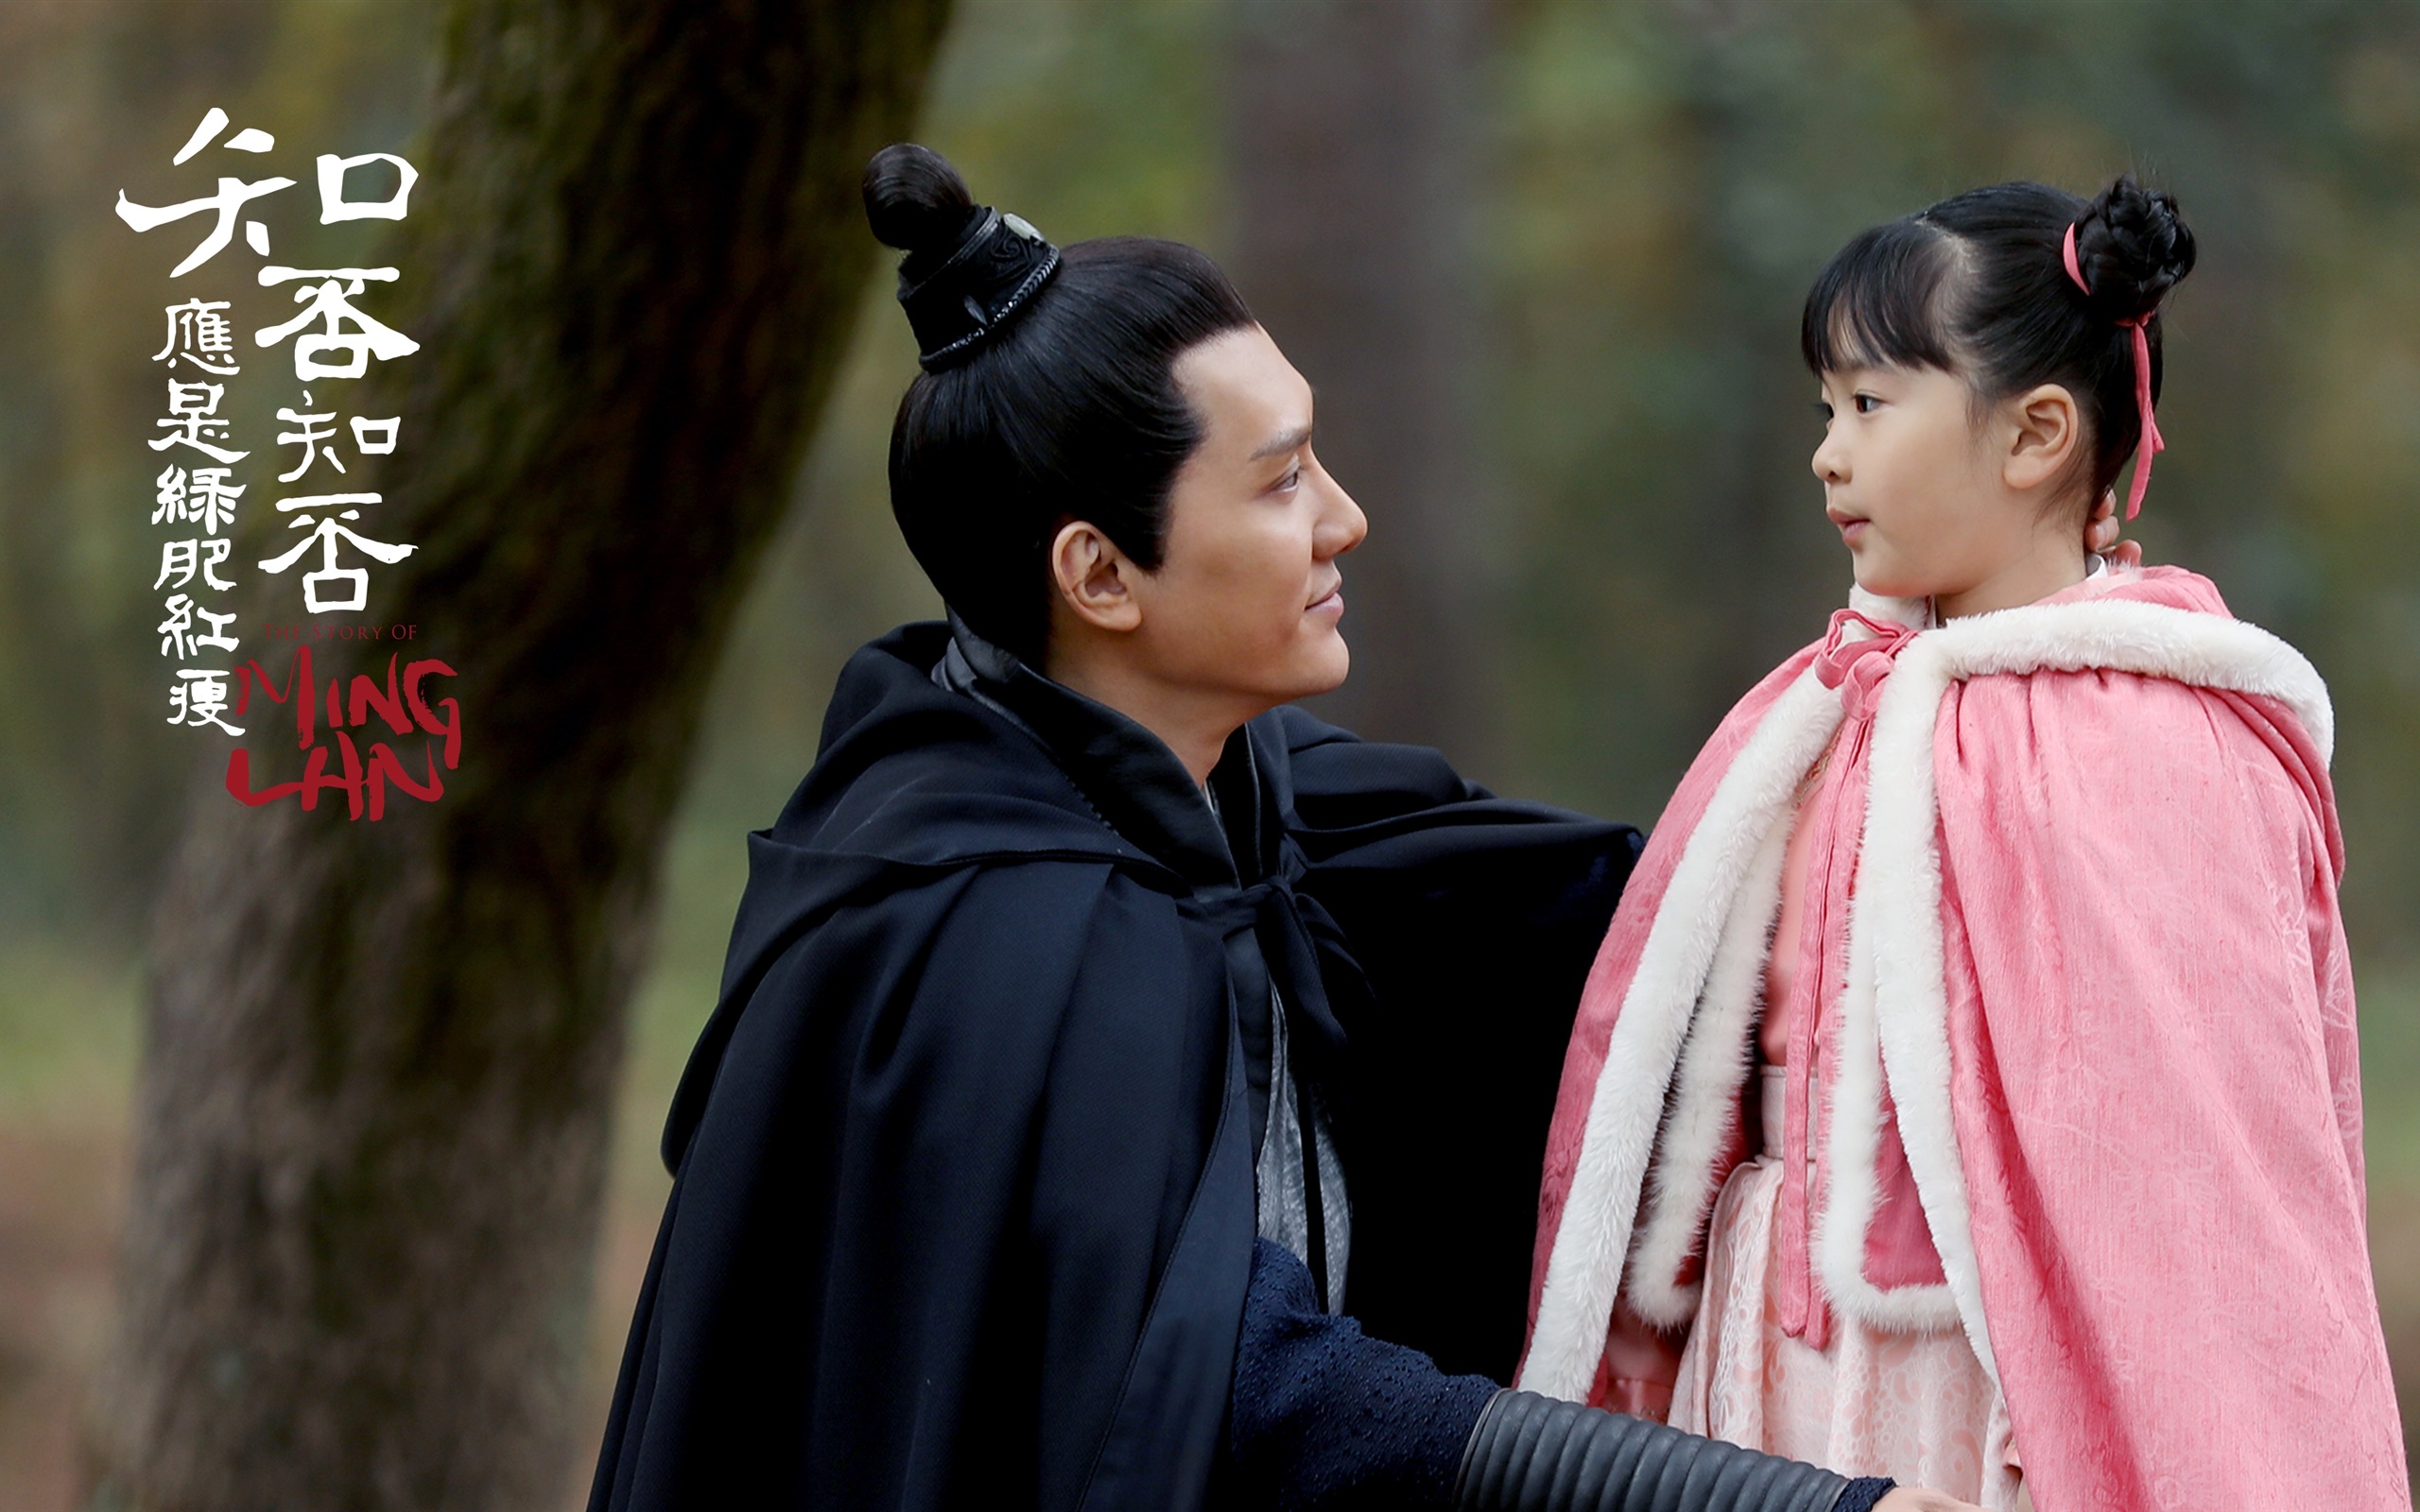 The Story Of MingLan, TV series HD wallpapers #21 - 2560x1600